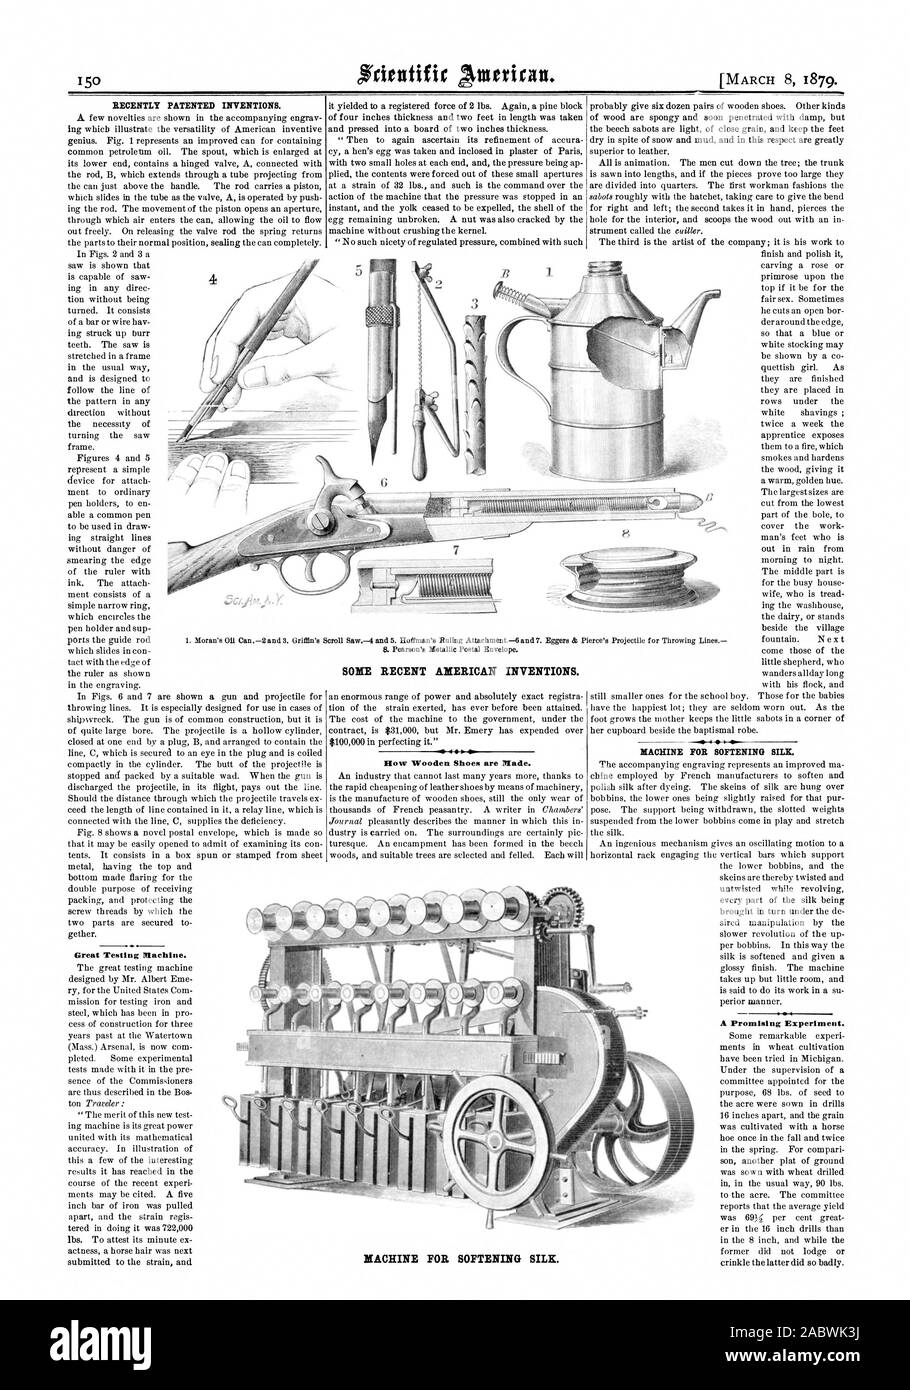 Great Testing Machine. How Wooden Shoes are Made. A Promising Experiment. 4 SOME RECENT AMERICAN INVENTIONS. MACHINE FOR SOFTENING SILK., scientific american, 1879-03-08 Stock Photo